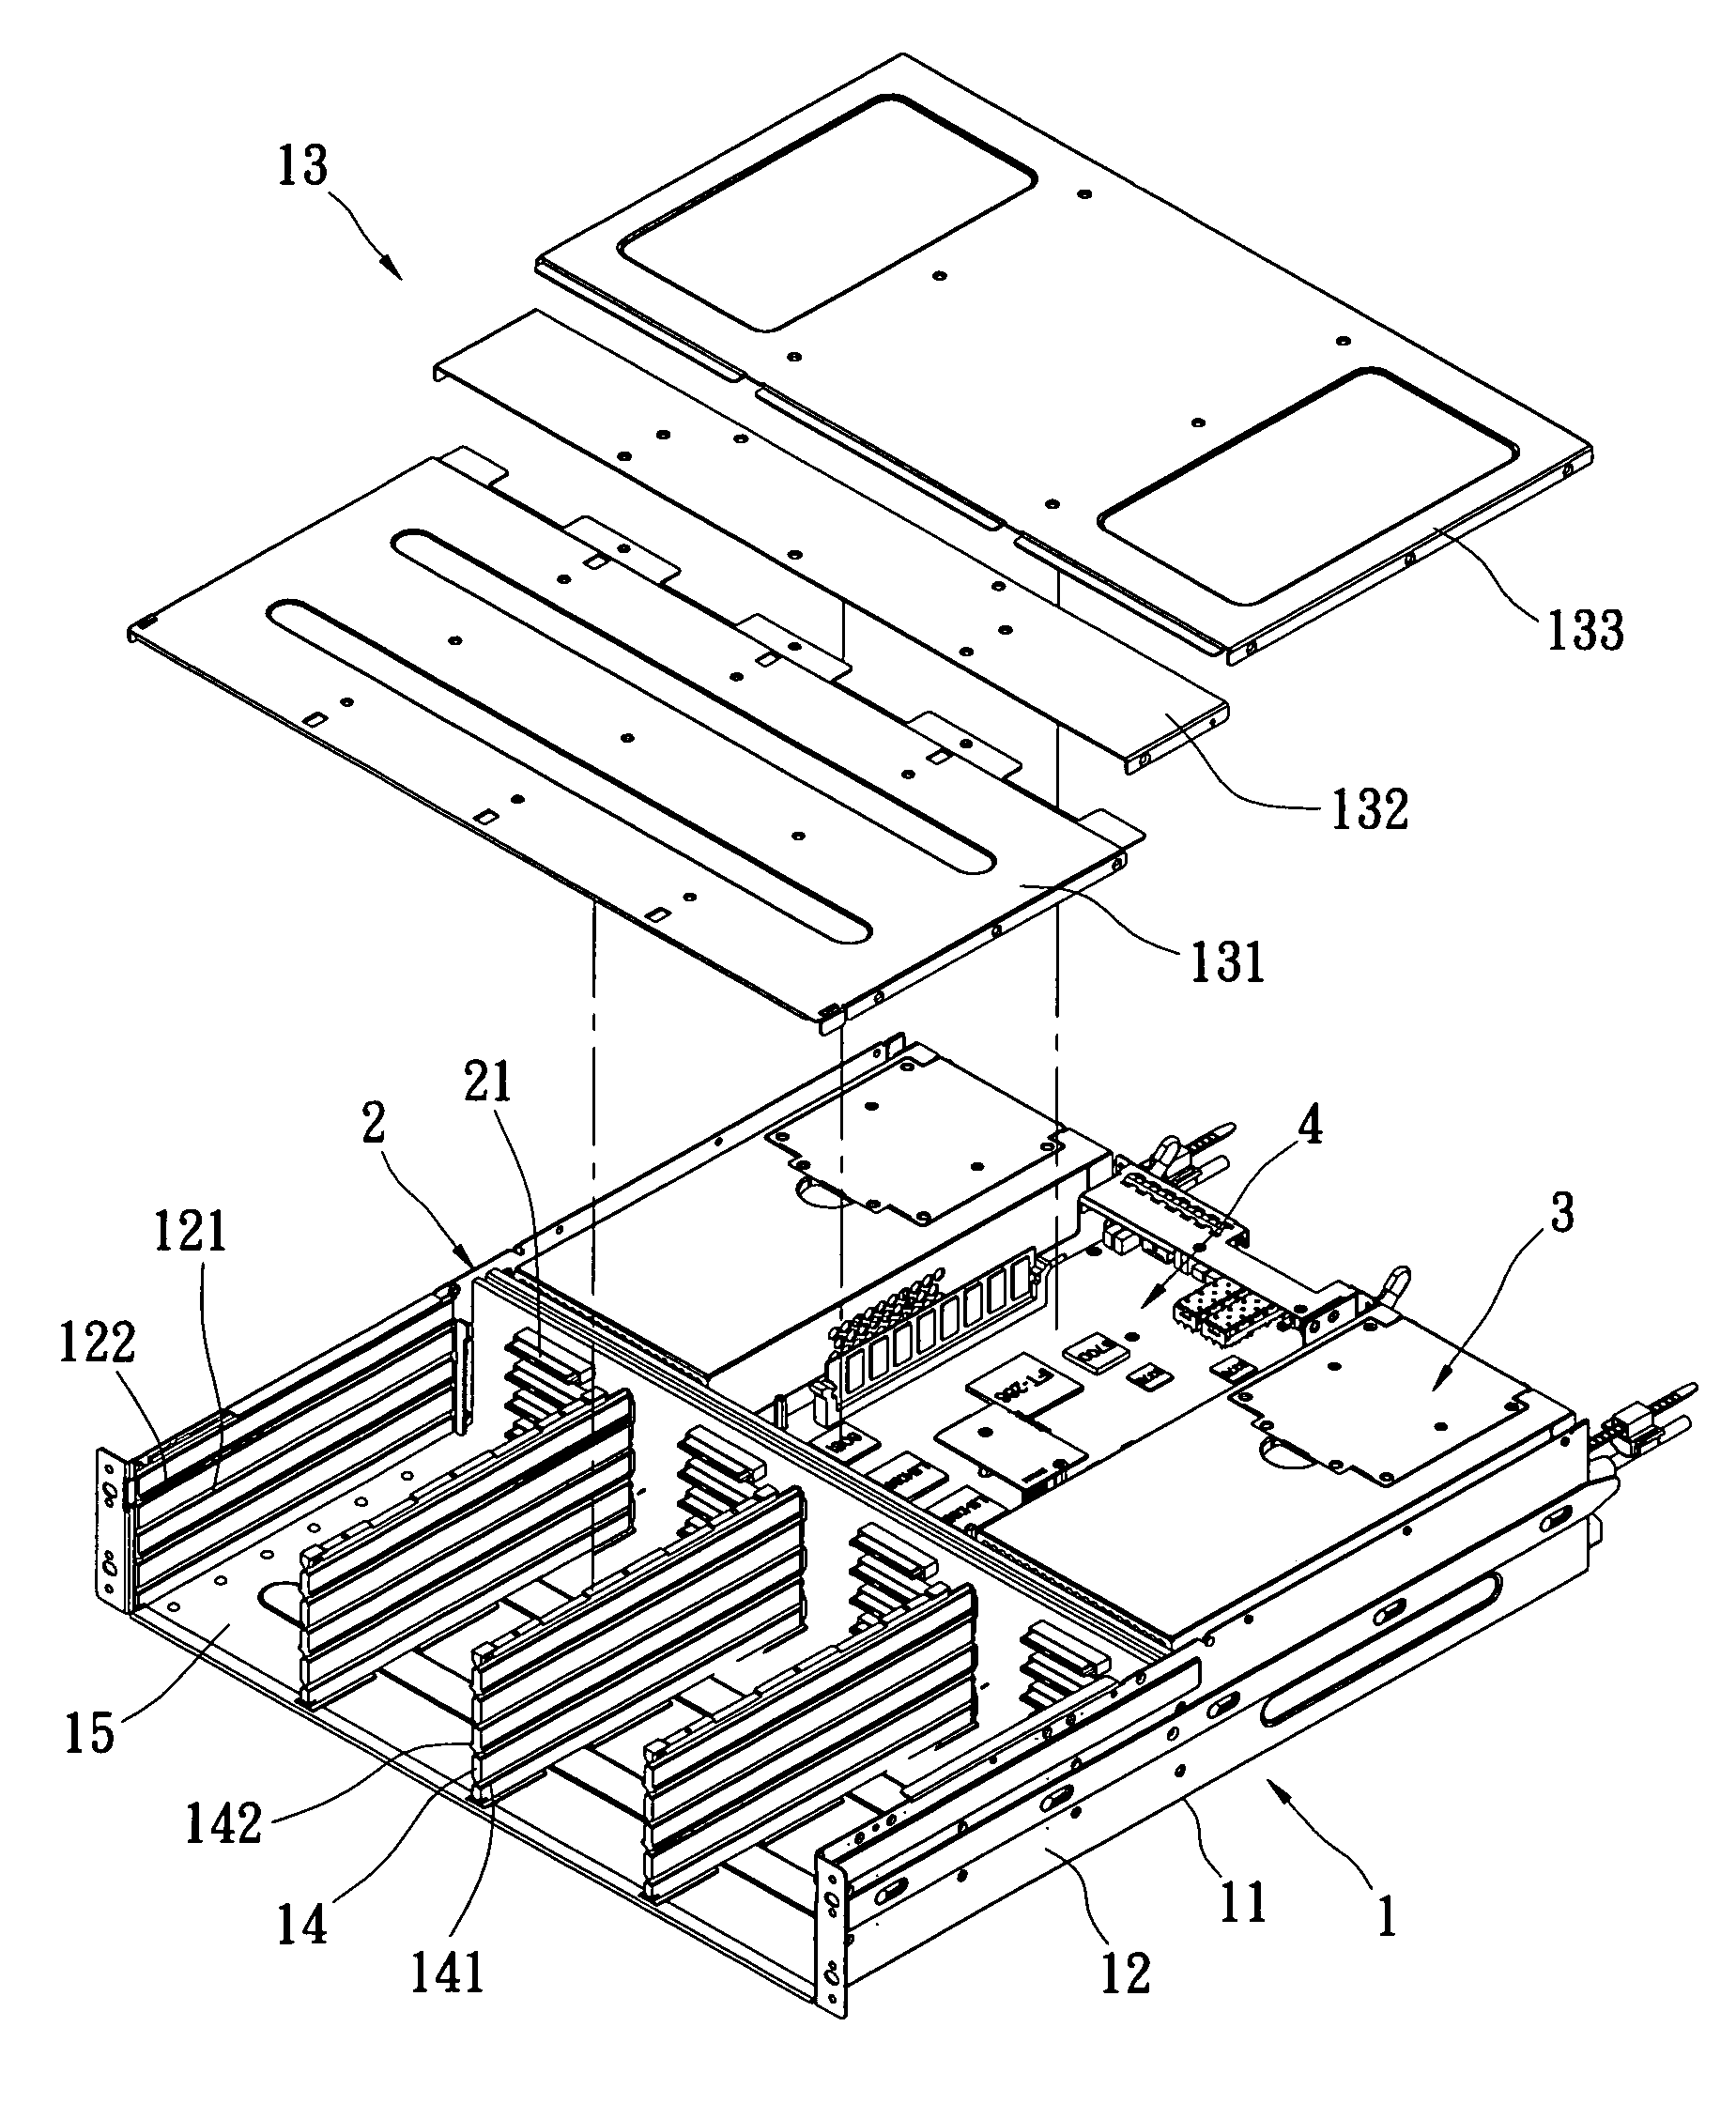 Storage system adapted for receiving a plurality of hard disk drives of different dimensions